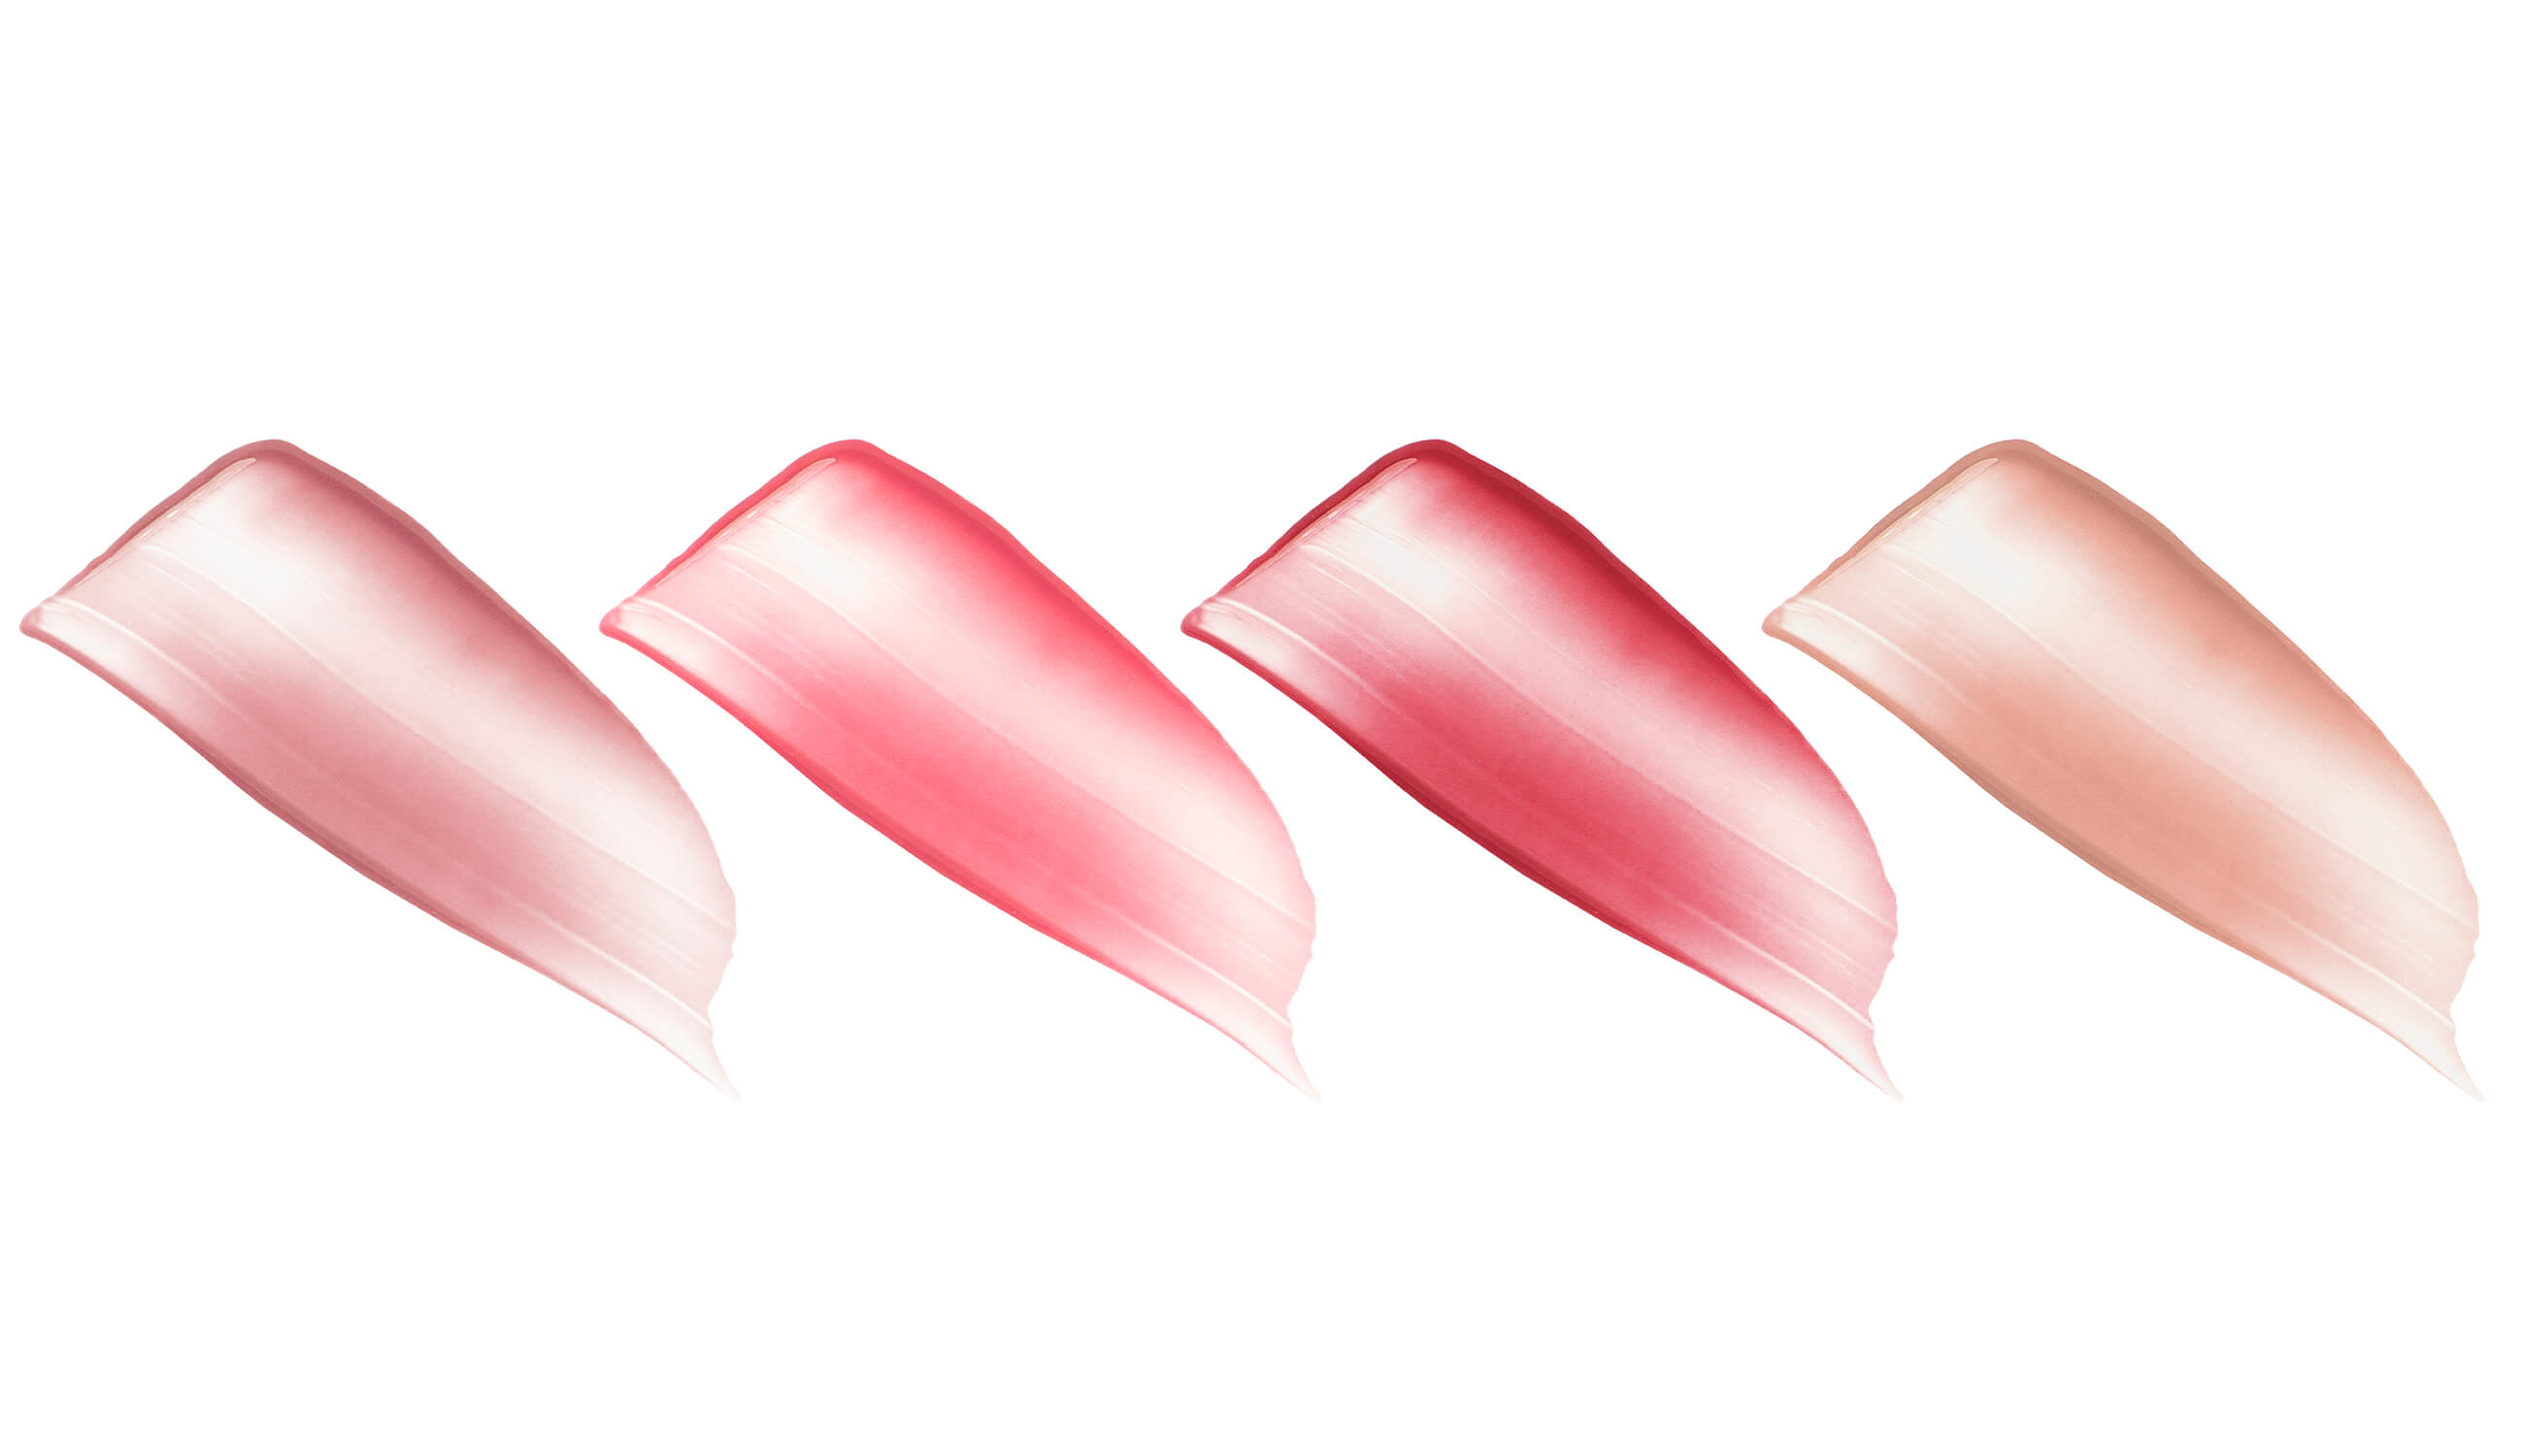 Swatches_swipes of sheer lip color.jpg